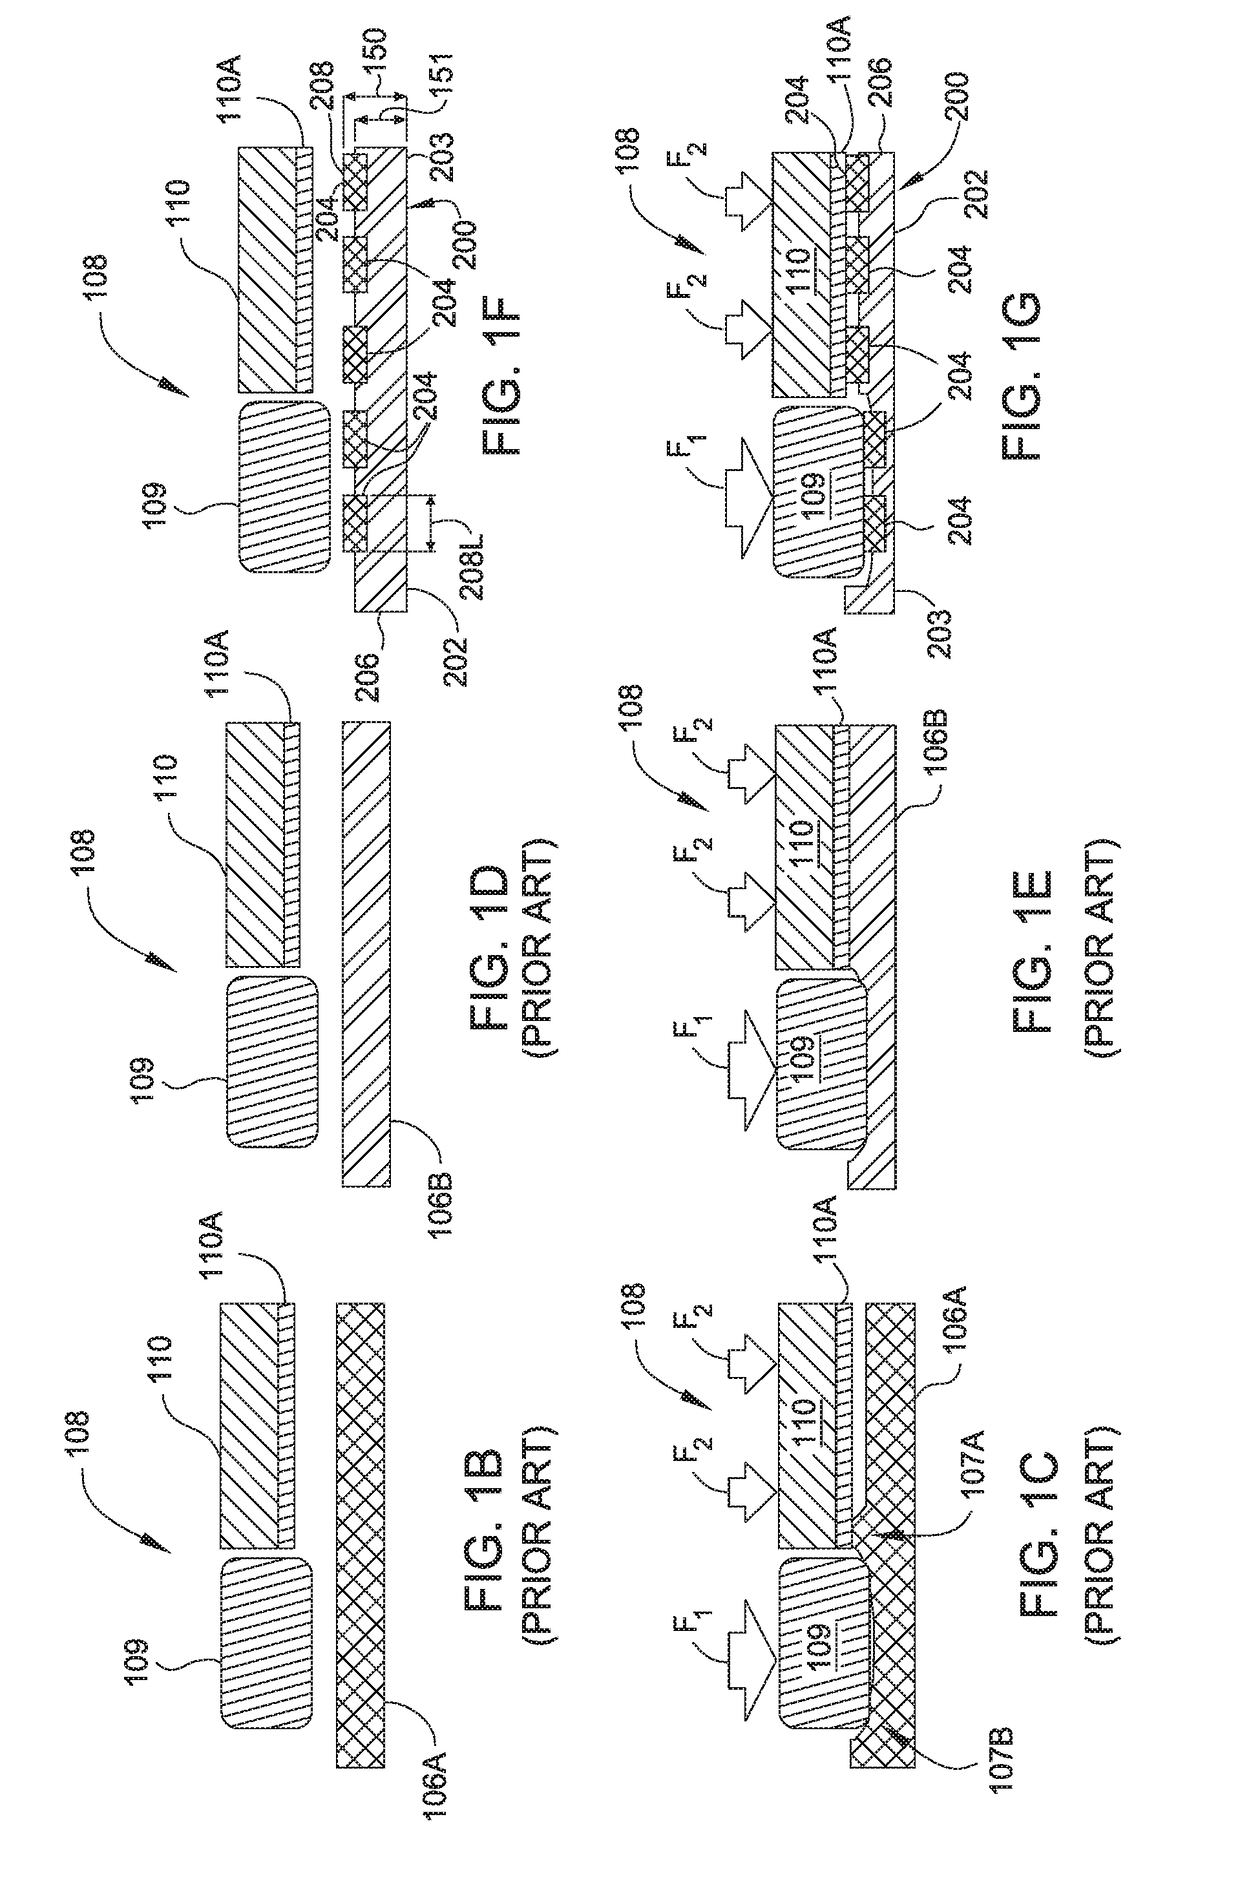 Apparatus and method of forming a polishing pads by use of an additive manufacturing process